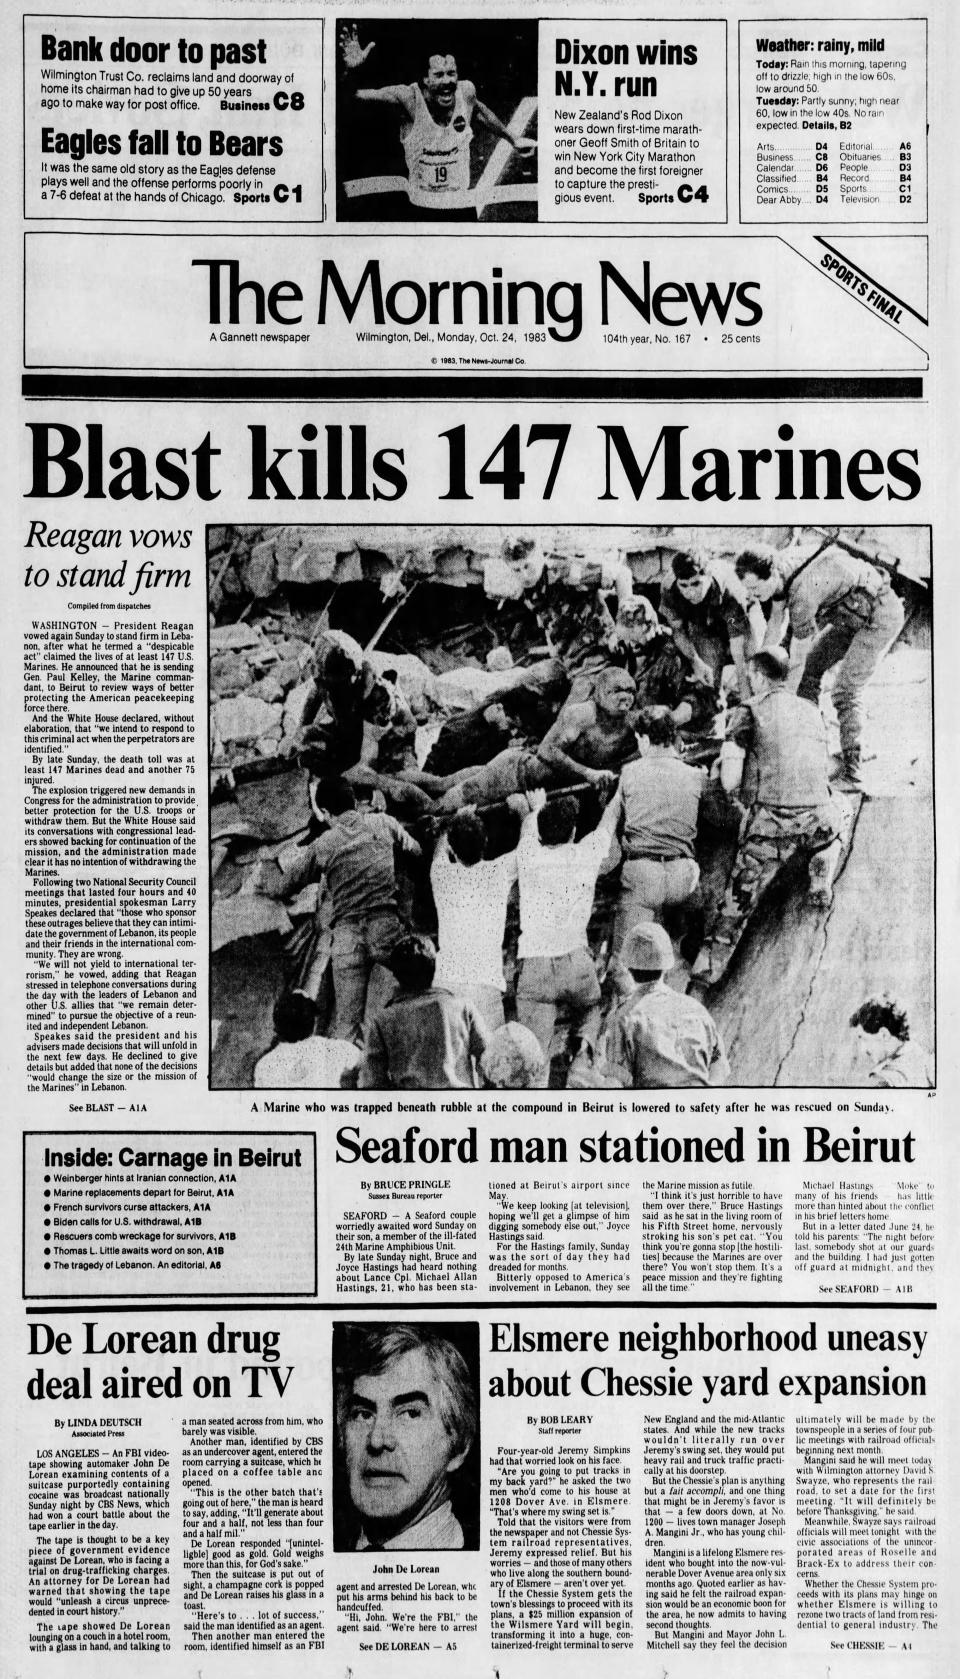 Front page of The Morning News from Oct. 24, 1983.